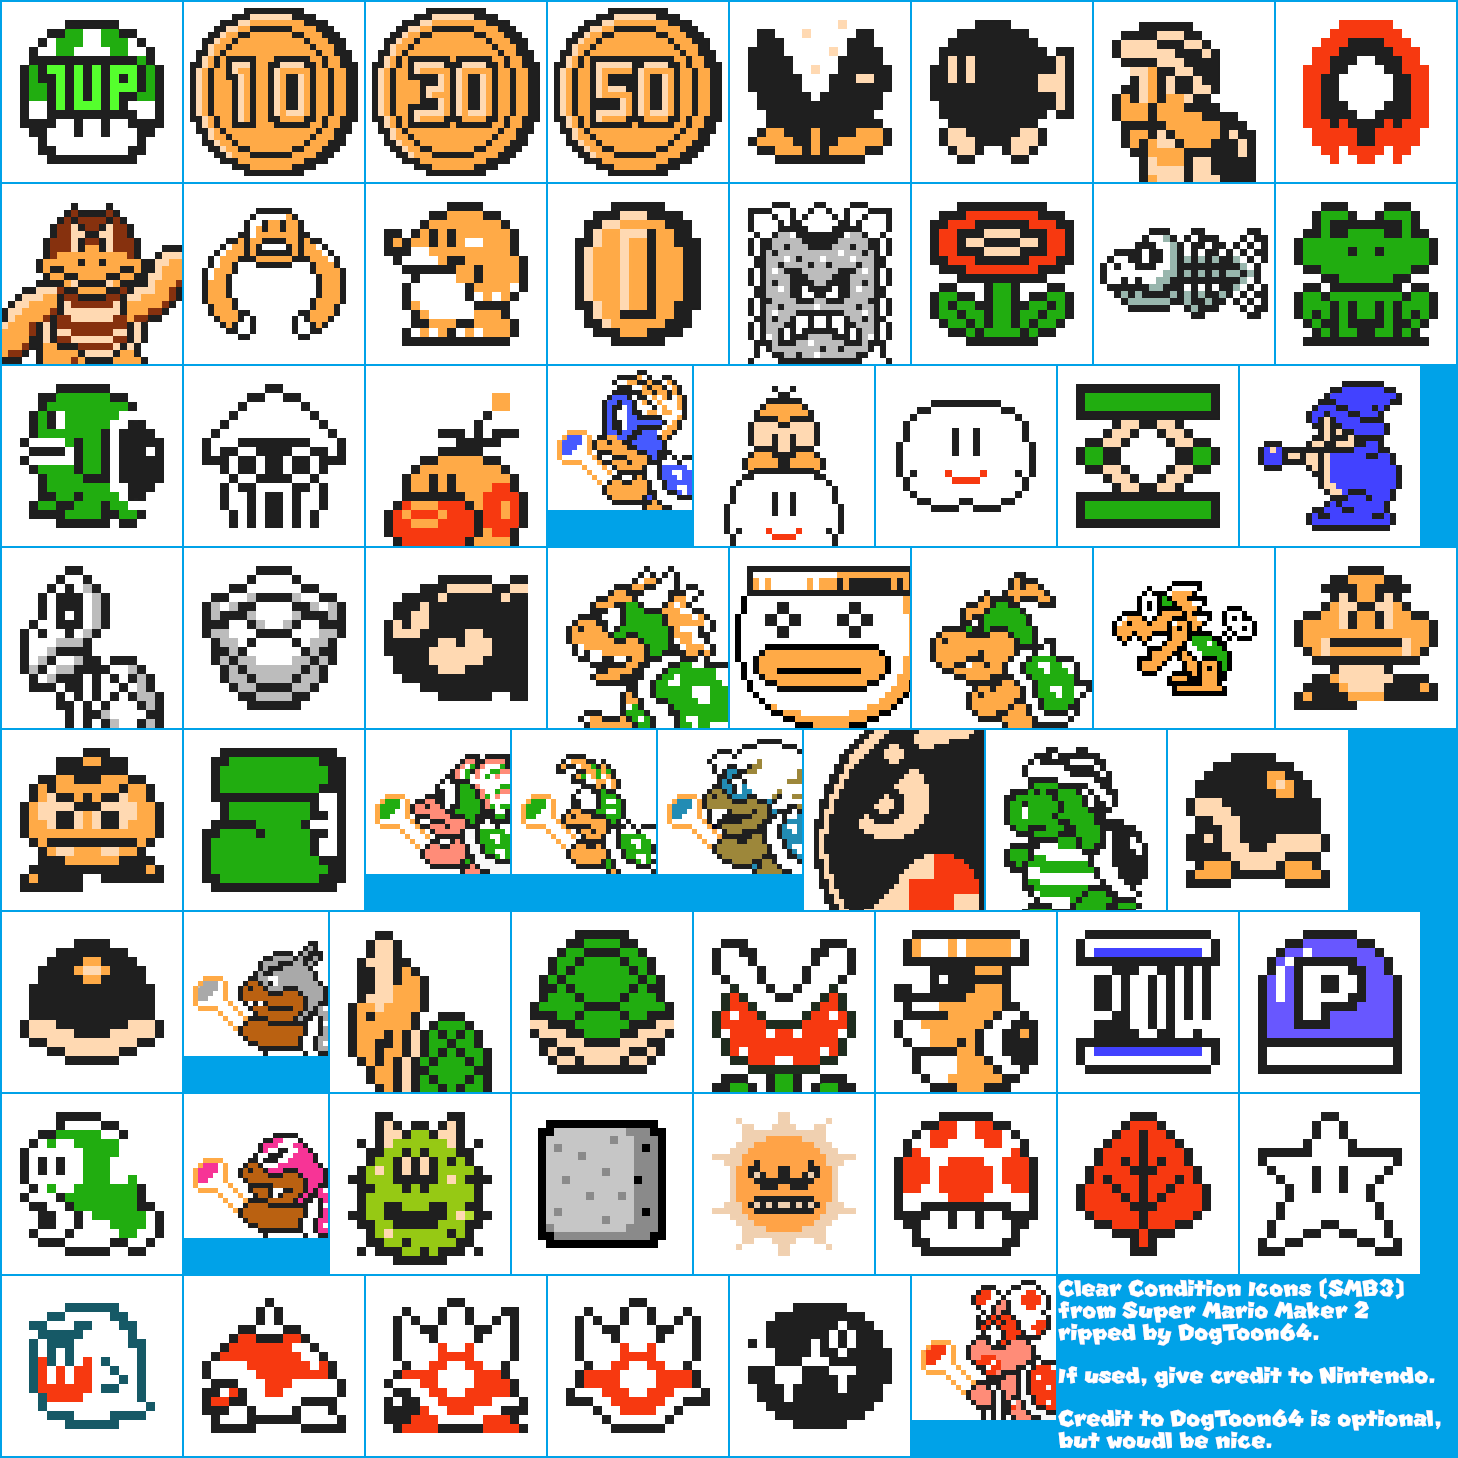 Clear Condition Icons (SMB3)